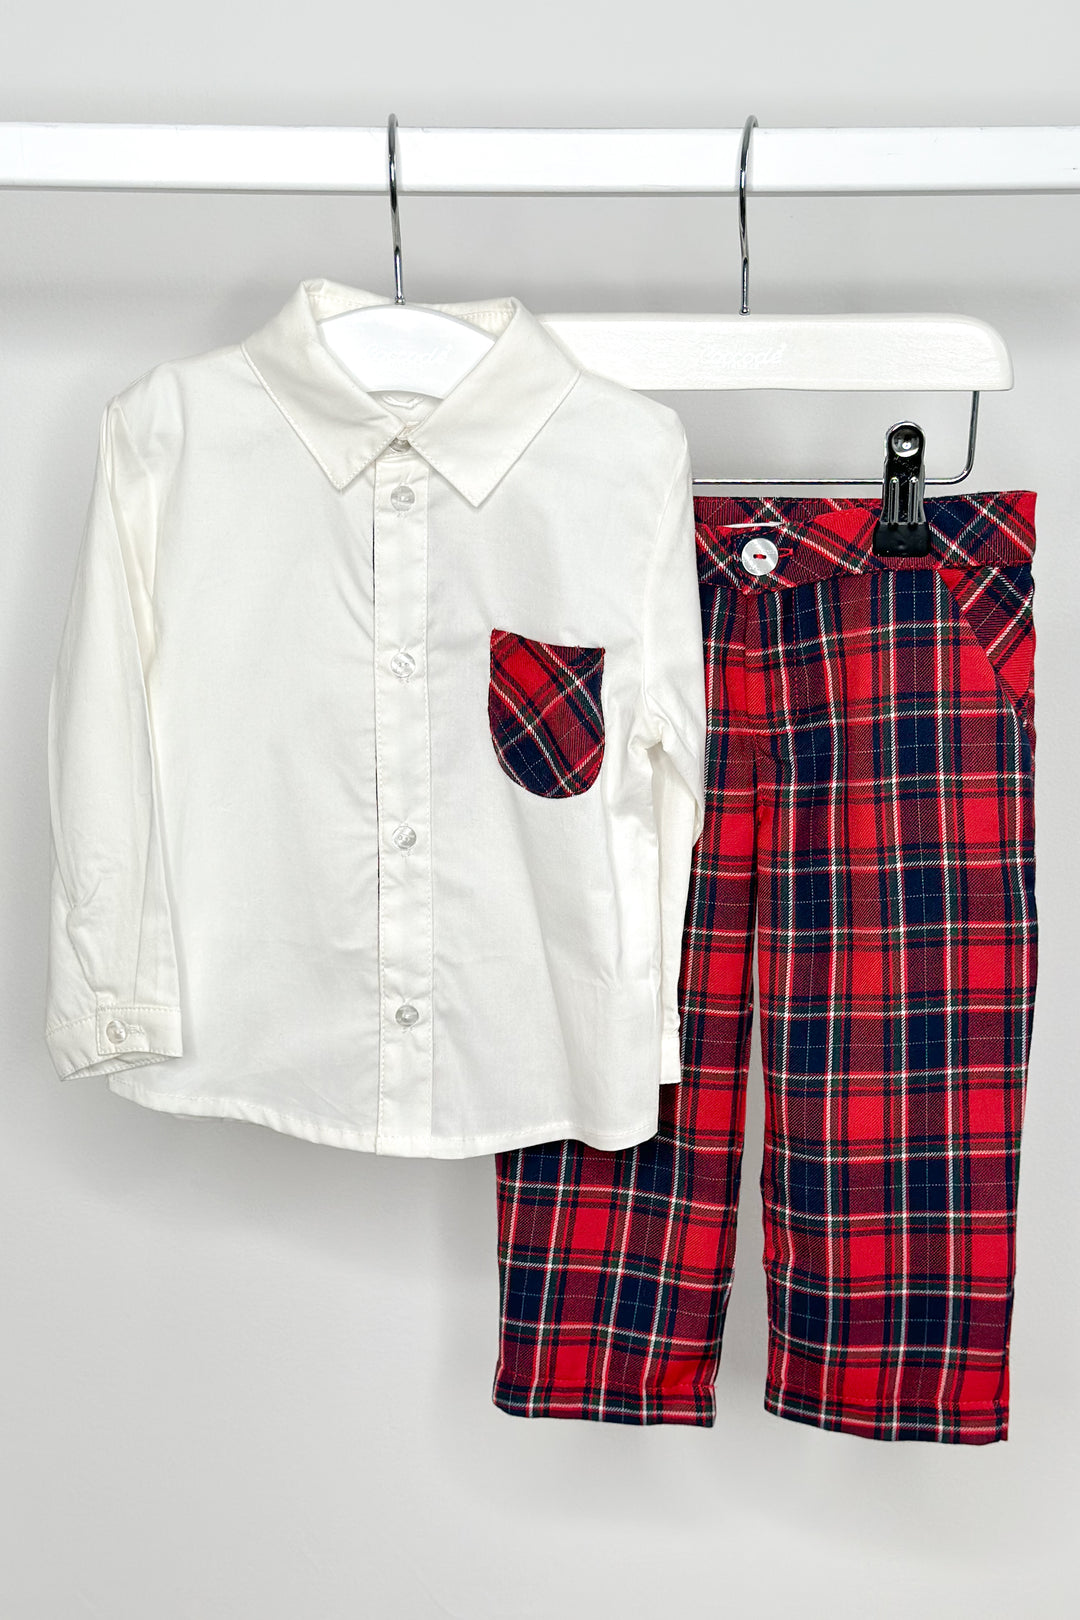 Coccodè "Aire" Red Tartan Shirt & Trousers | Millie and John